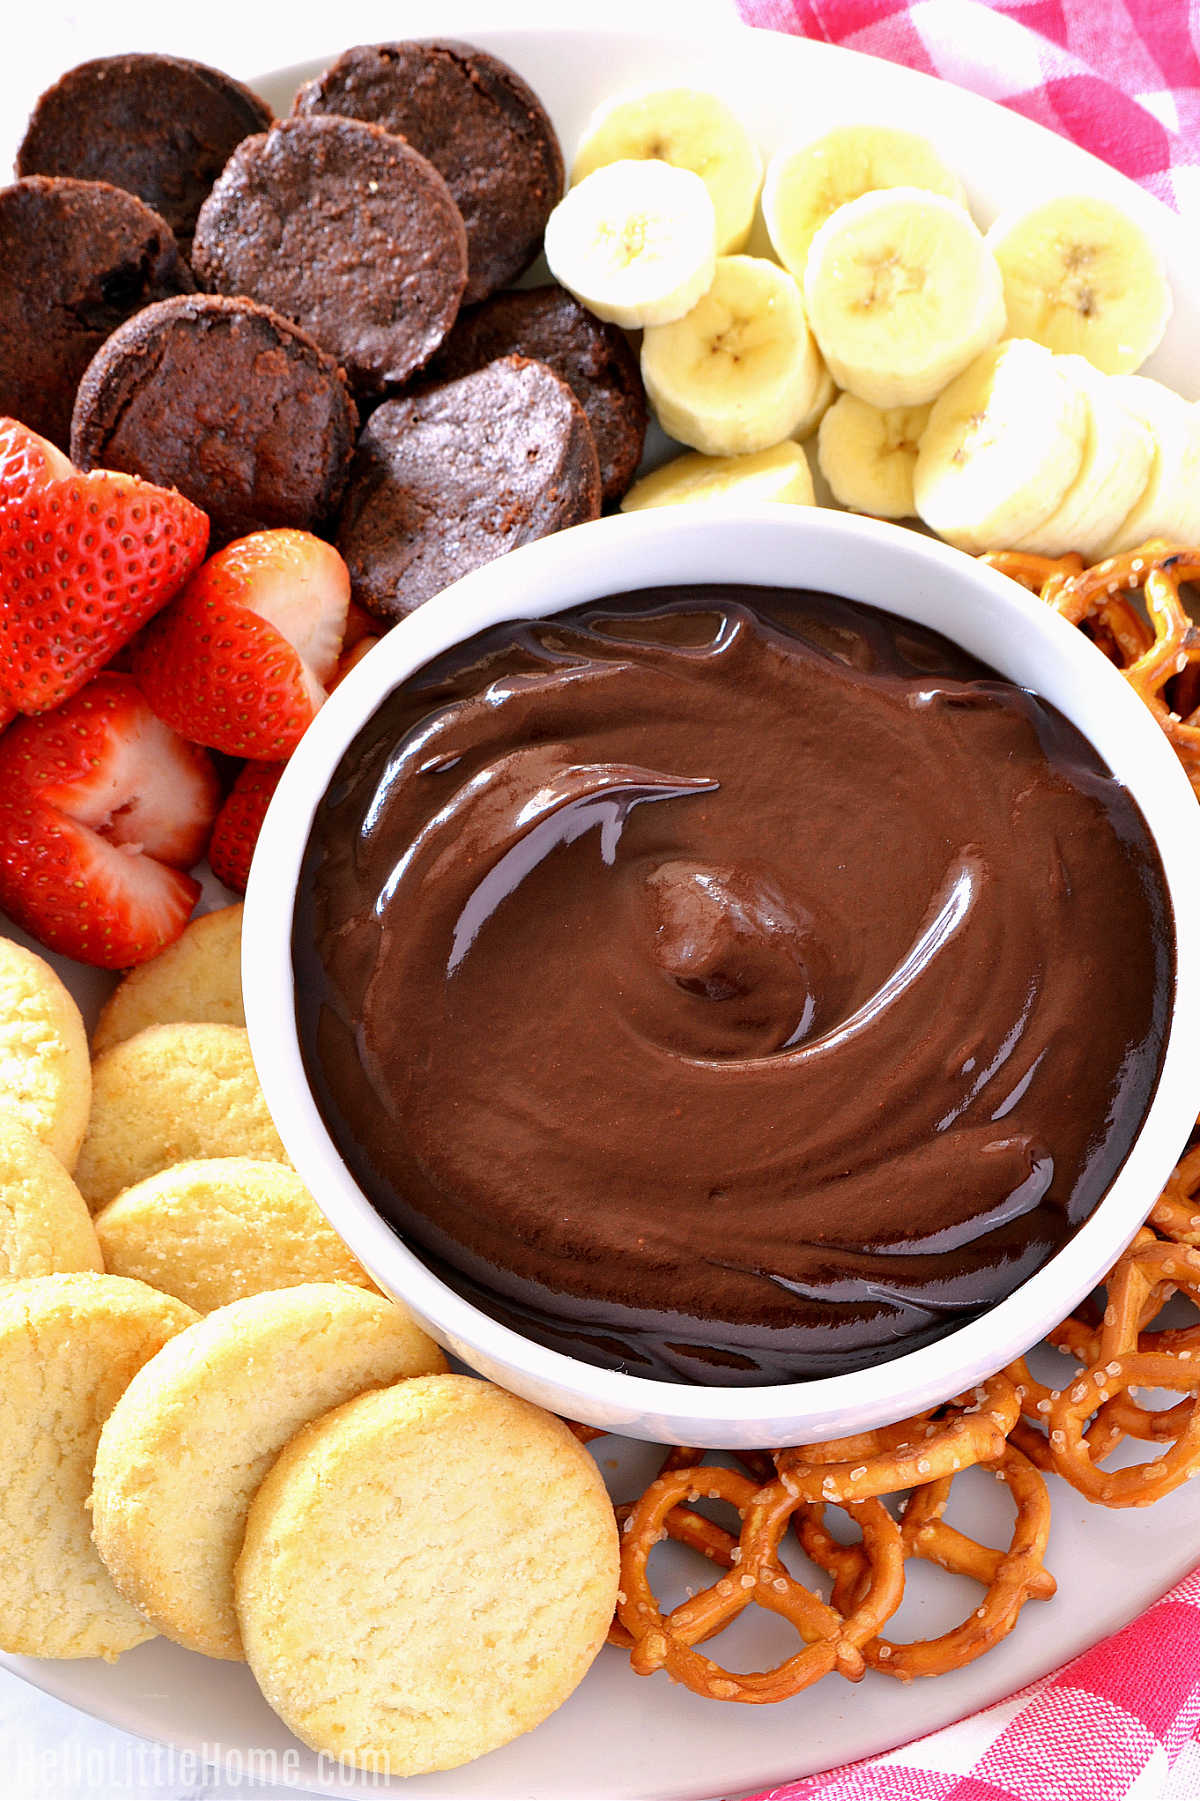 A platter topped with fondue and different foods for dipping.